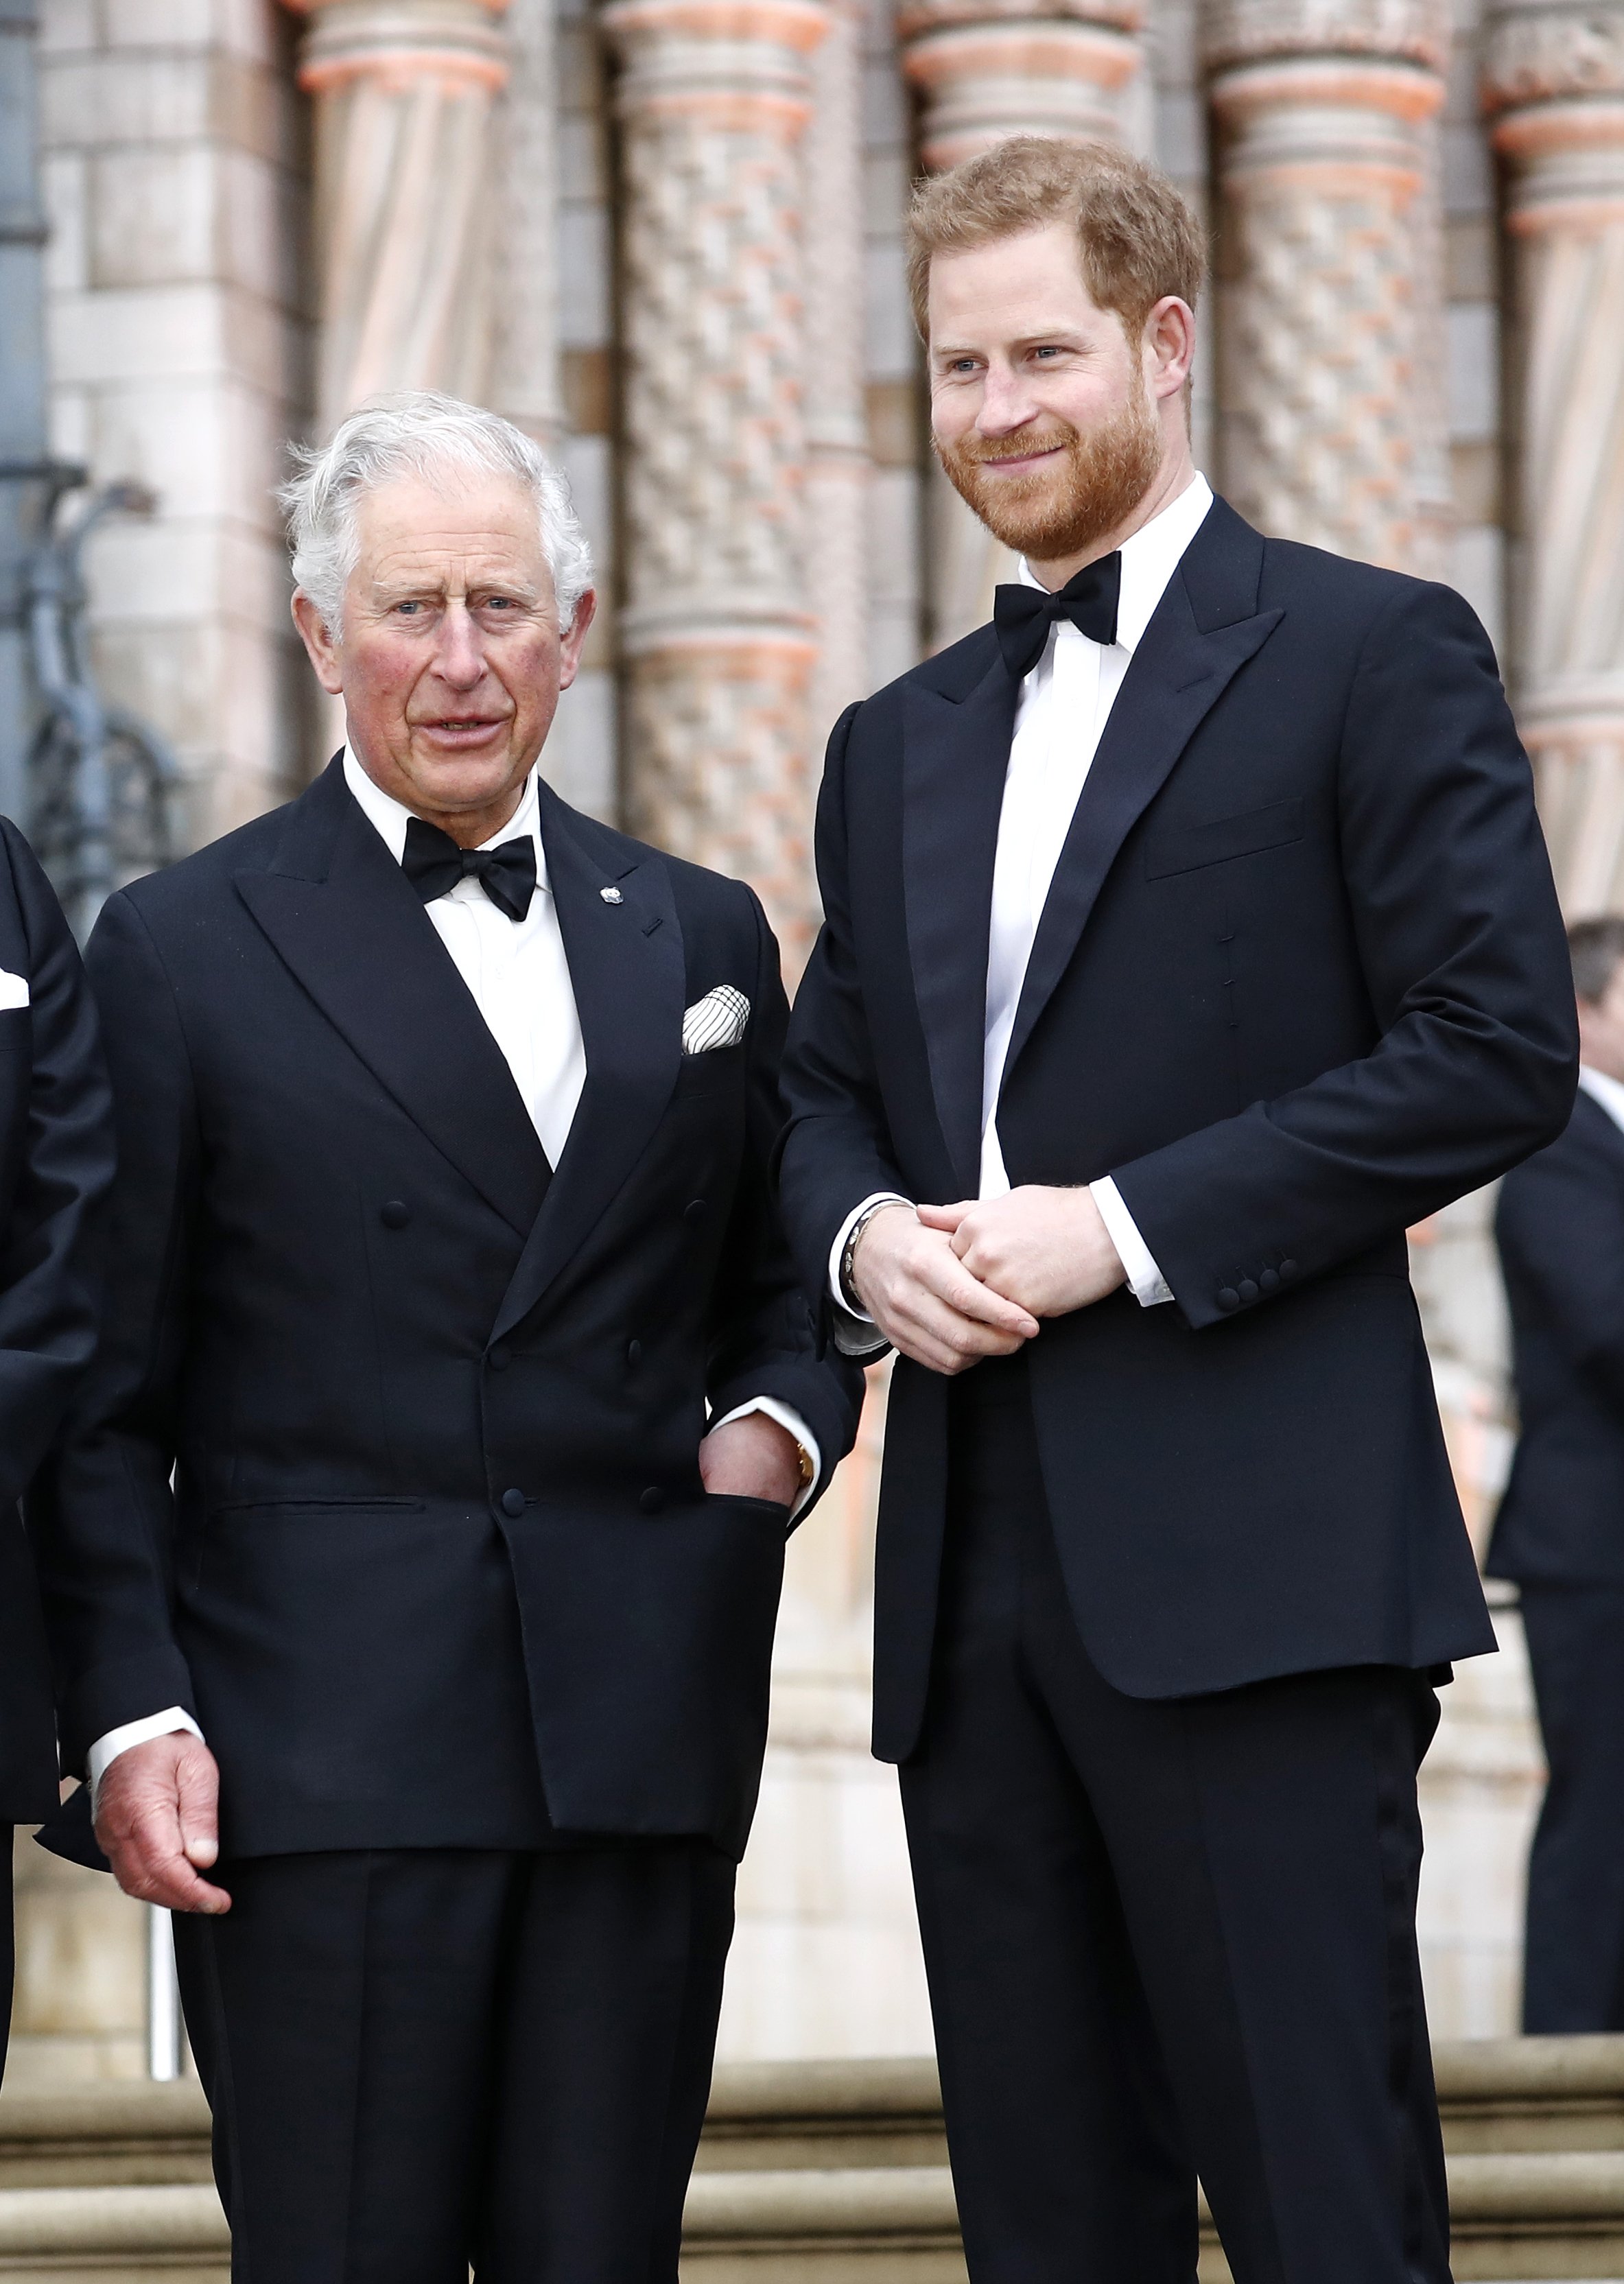 Prince Charles and Prince Harry attend the "Our Planet" global premiere at the Natural History Museum on April 04, 2019 in London, England | Photo: Getty Images